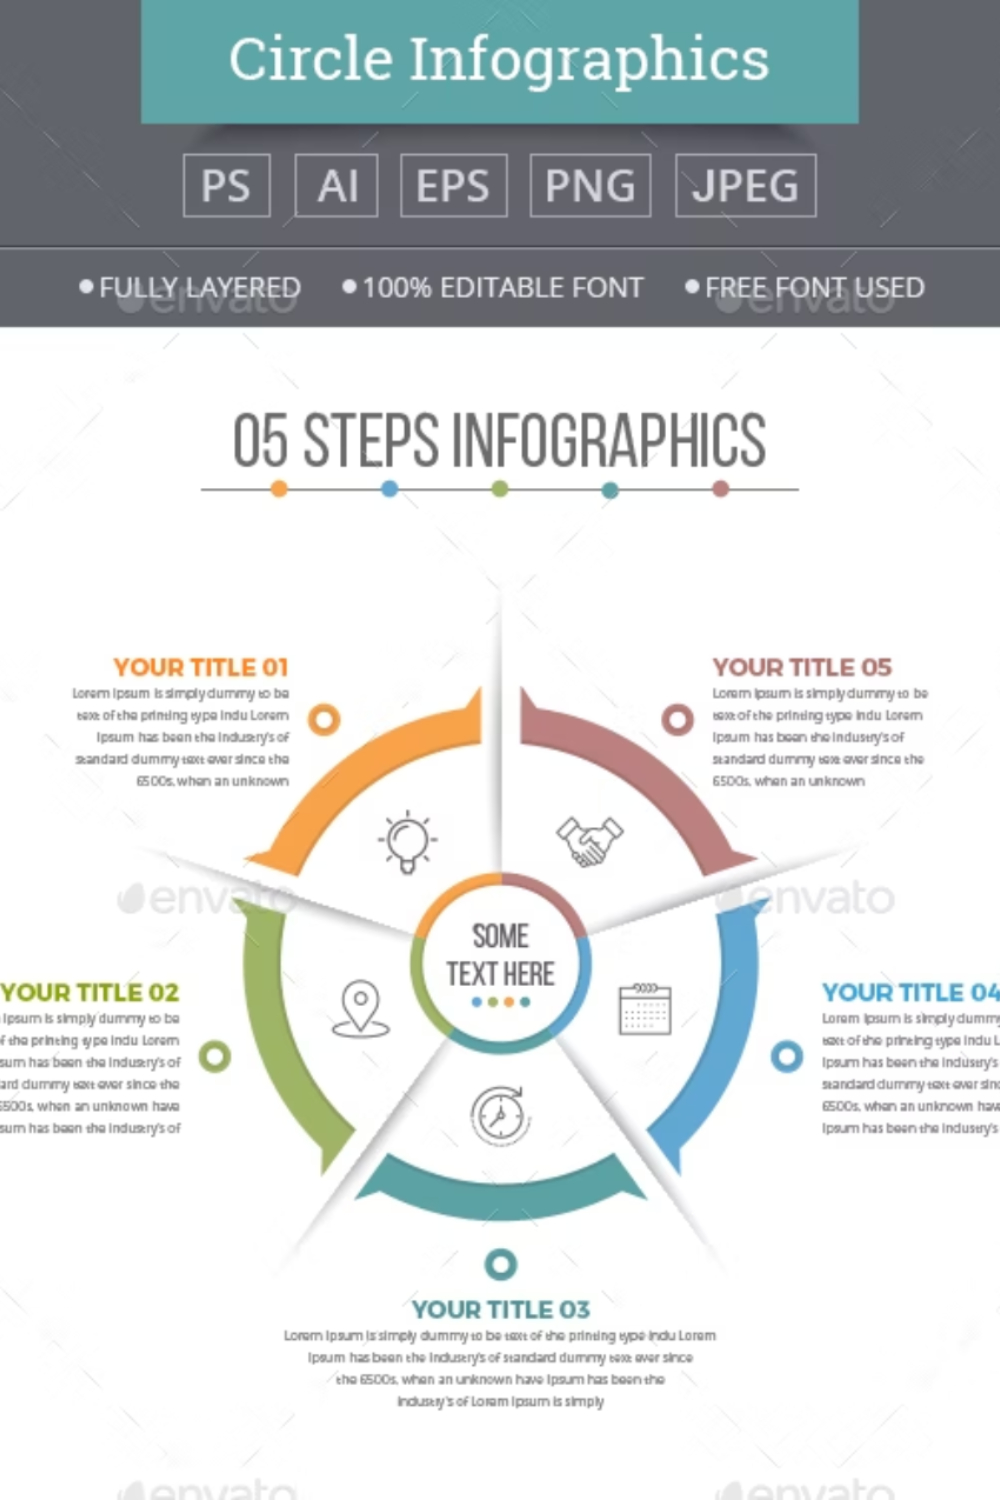 Business Circle Infographics With 05 Steps Pinterest Cover.